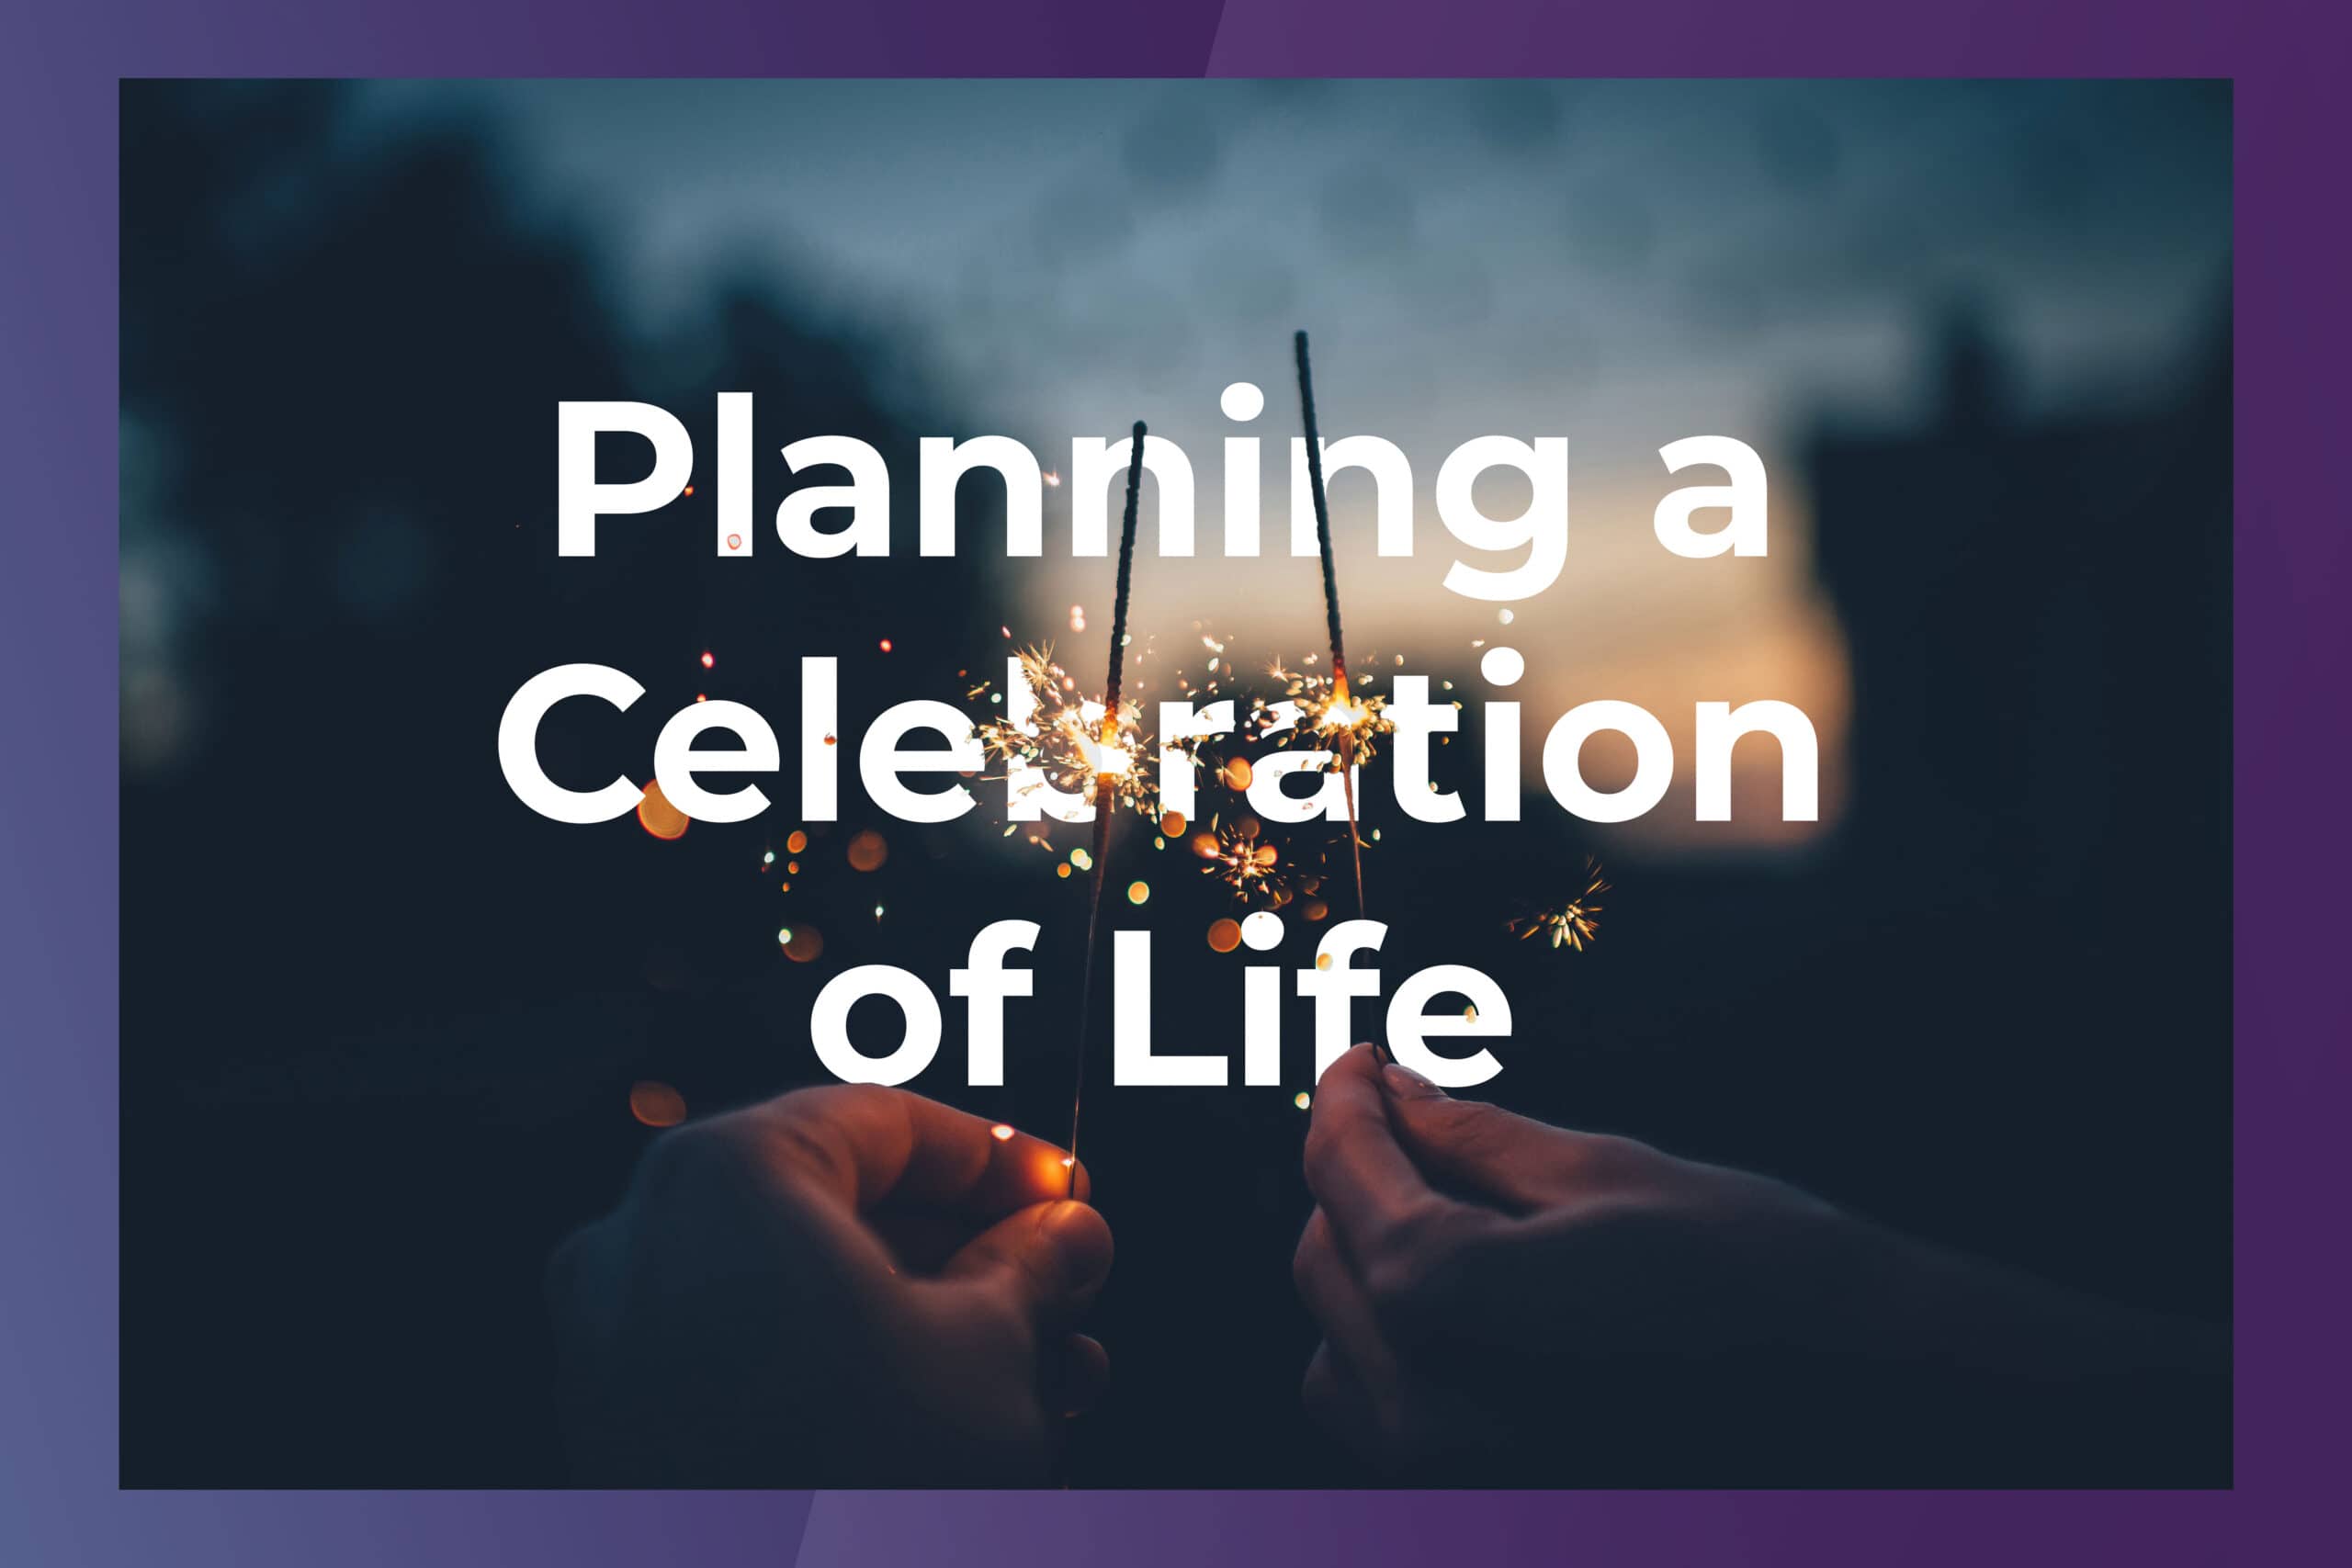 Planning a celebration of life? Here's what to know